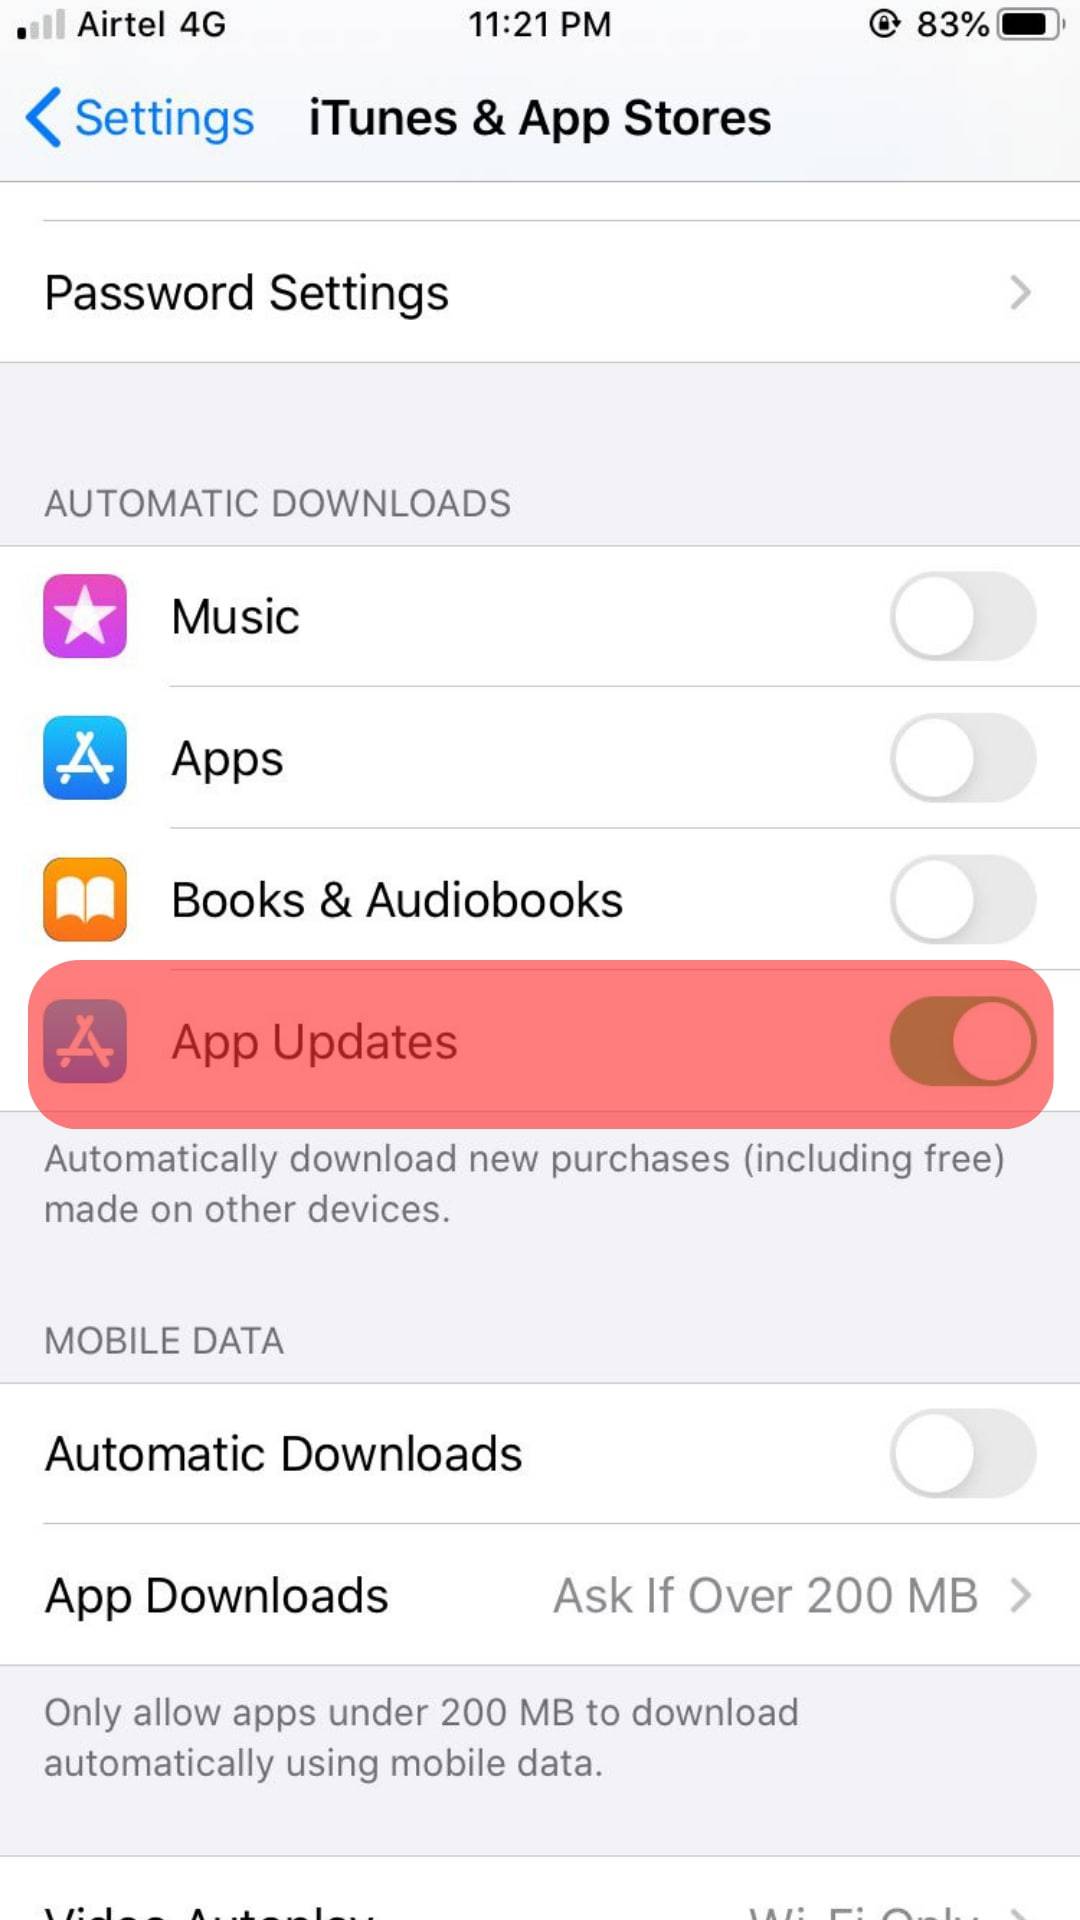 Enable App Updates In The Automatic Downloads Section.